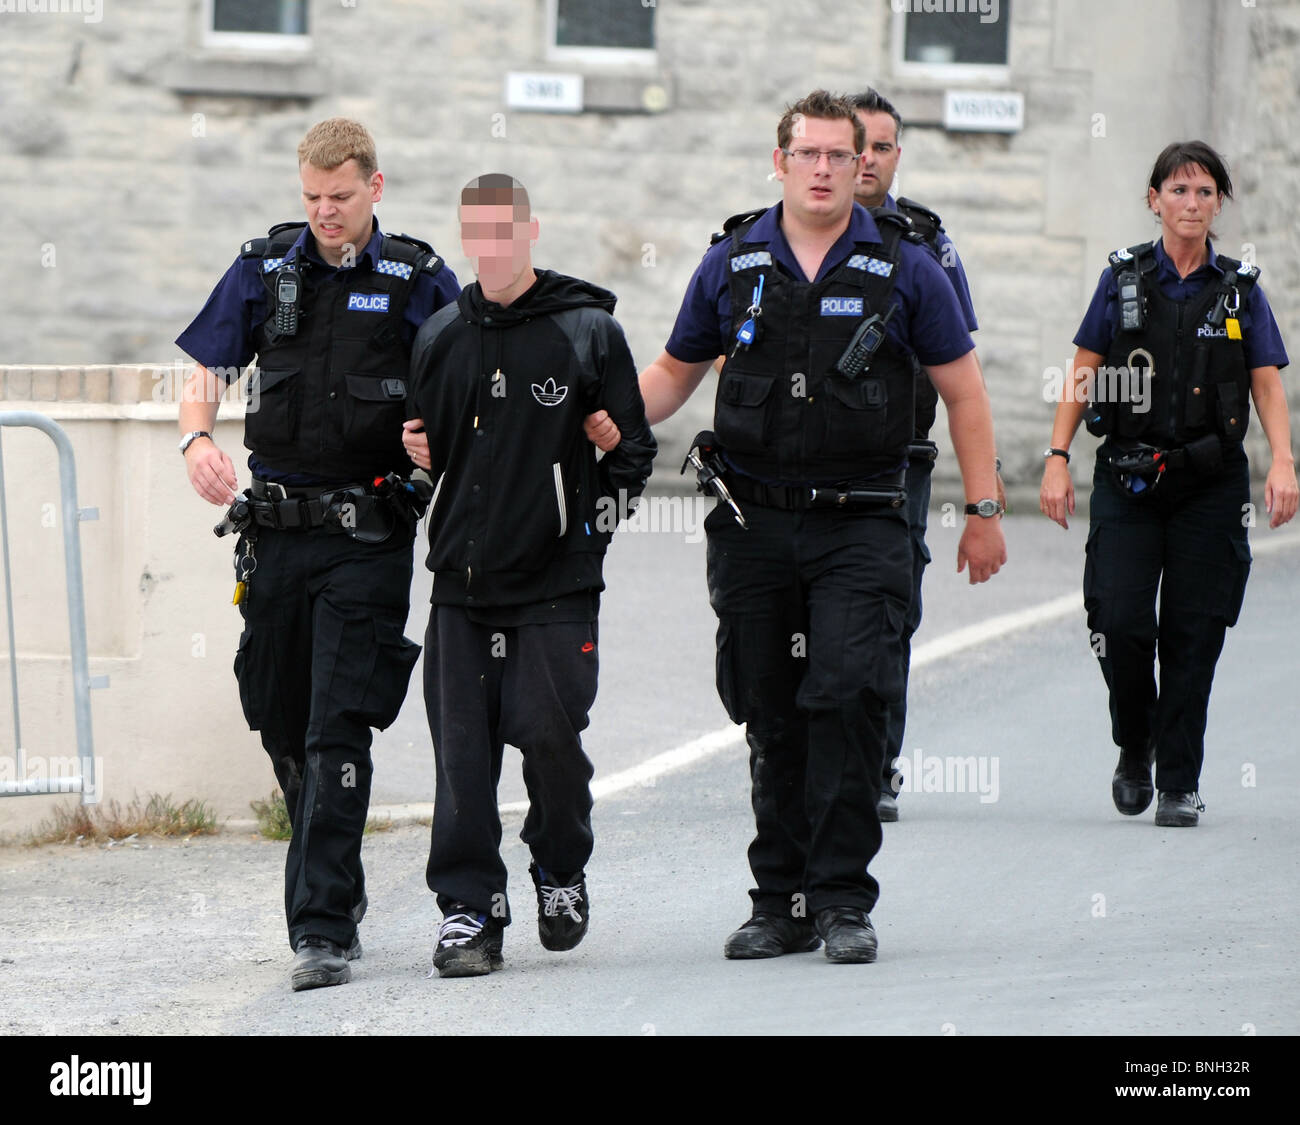 Police arresting a youth (offenders face has been obscured), Britain, UK Stock Photo